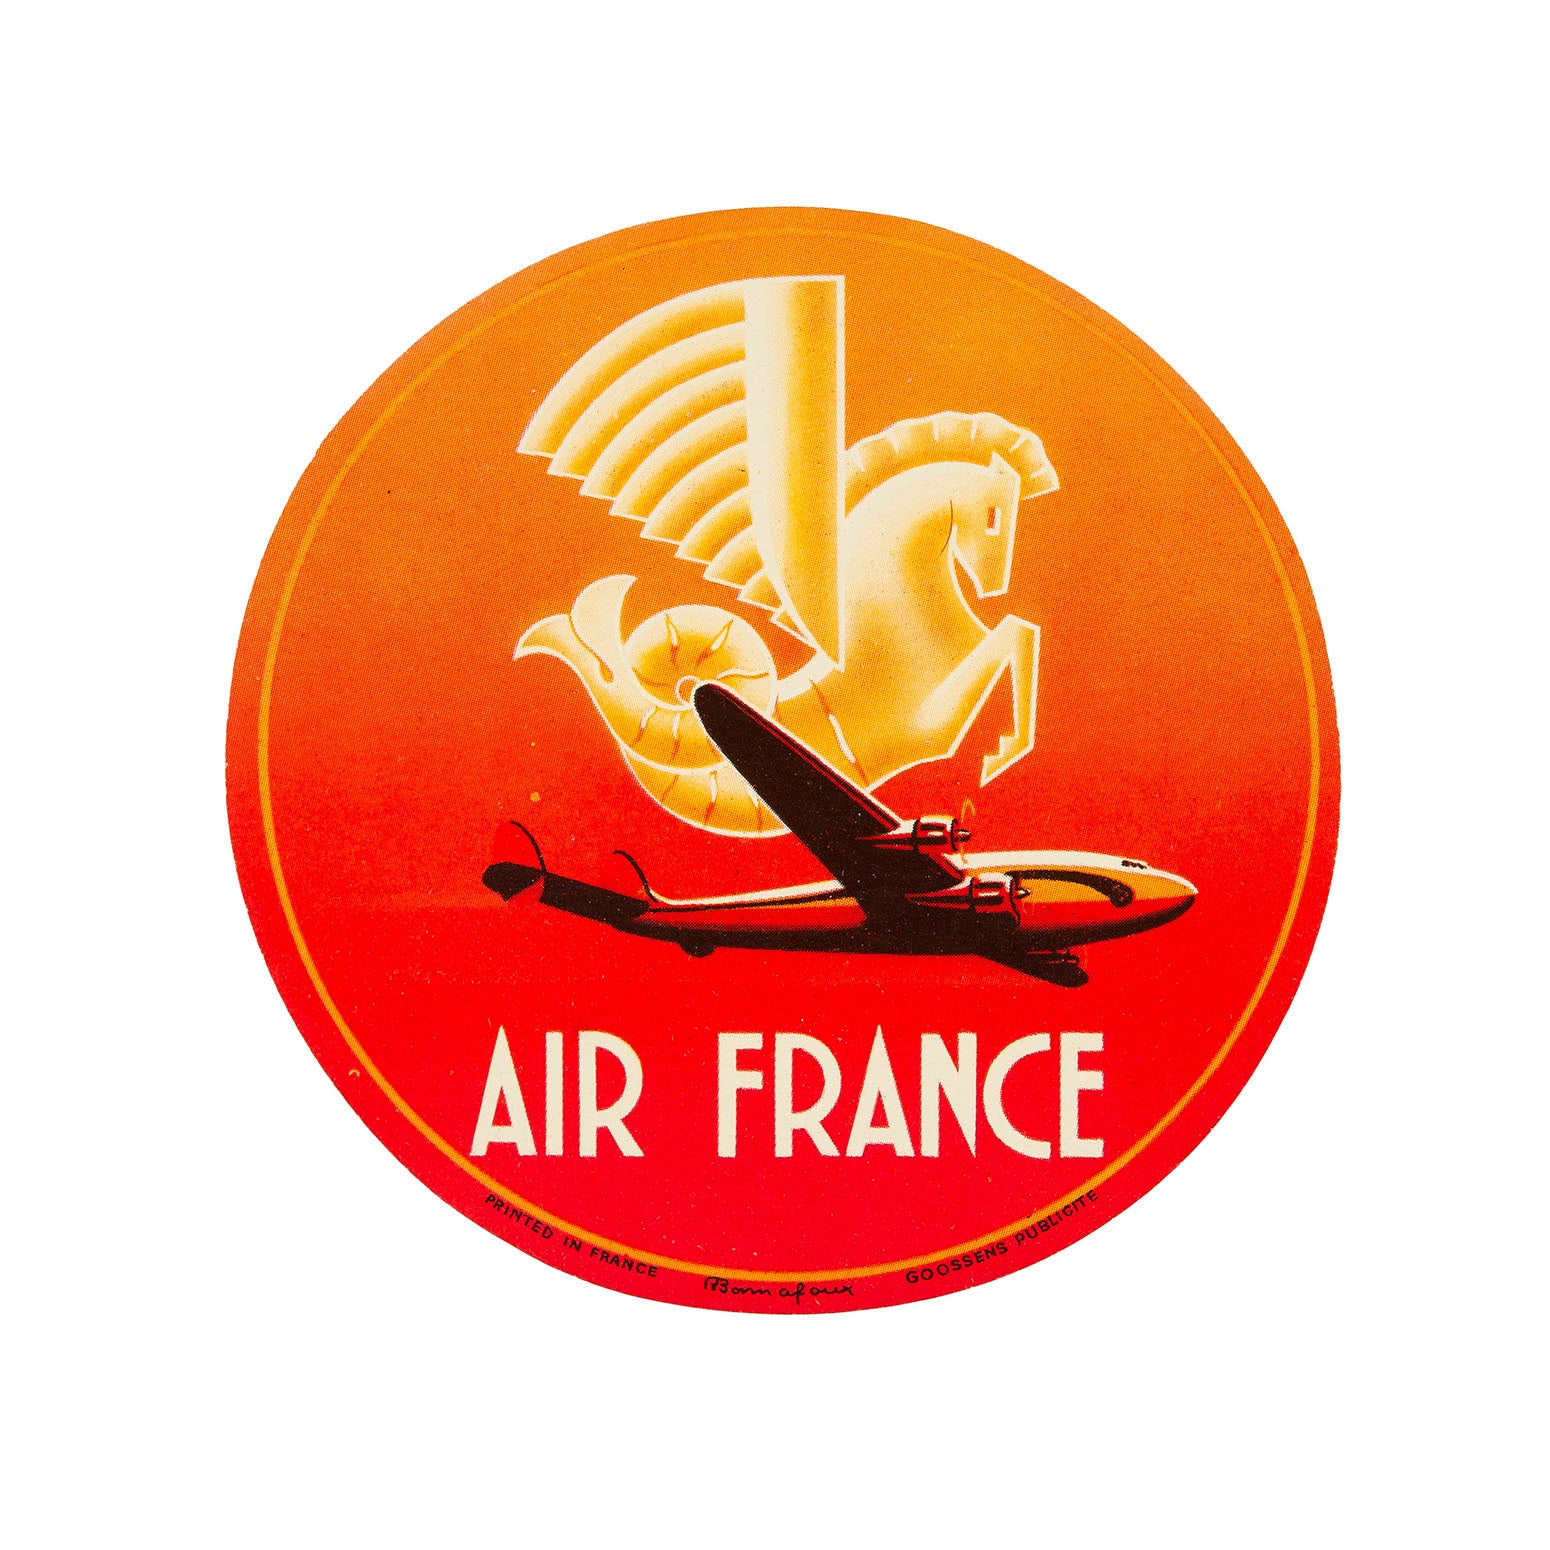 Air France (Luggage Label, smaller plane version)